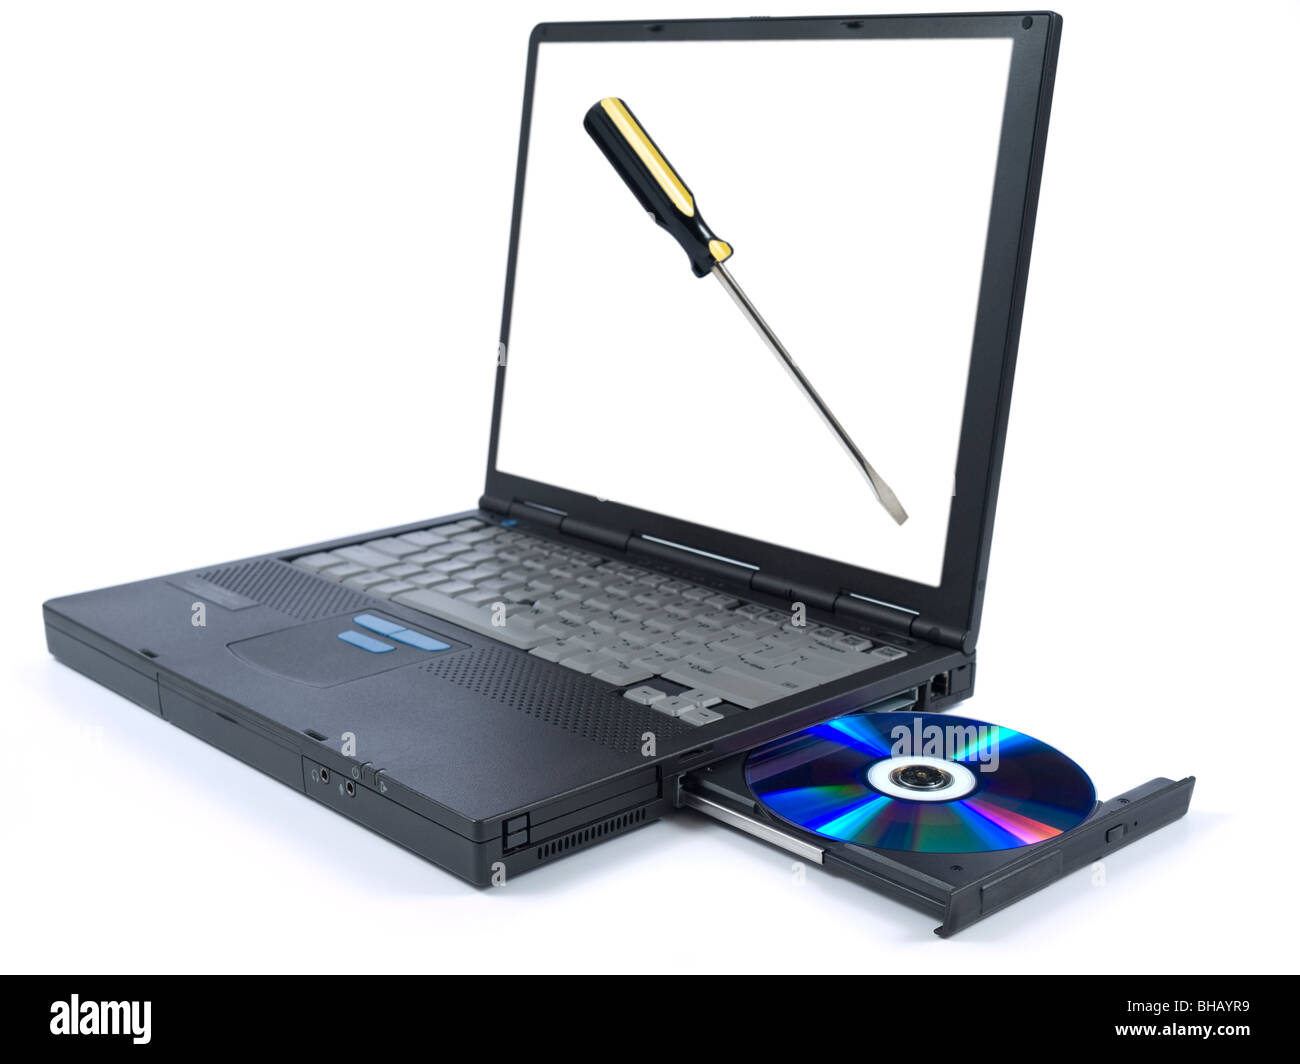 Isolated black laptop with a DVD in tray and an isolated screwdriver on the screen. Stock Photo